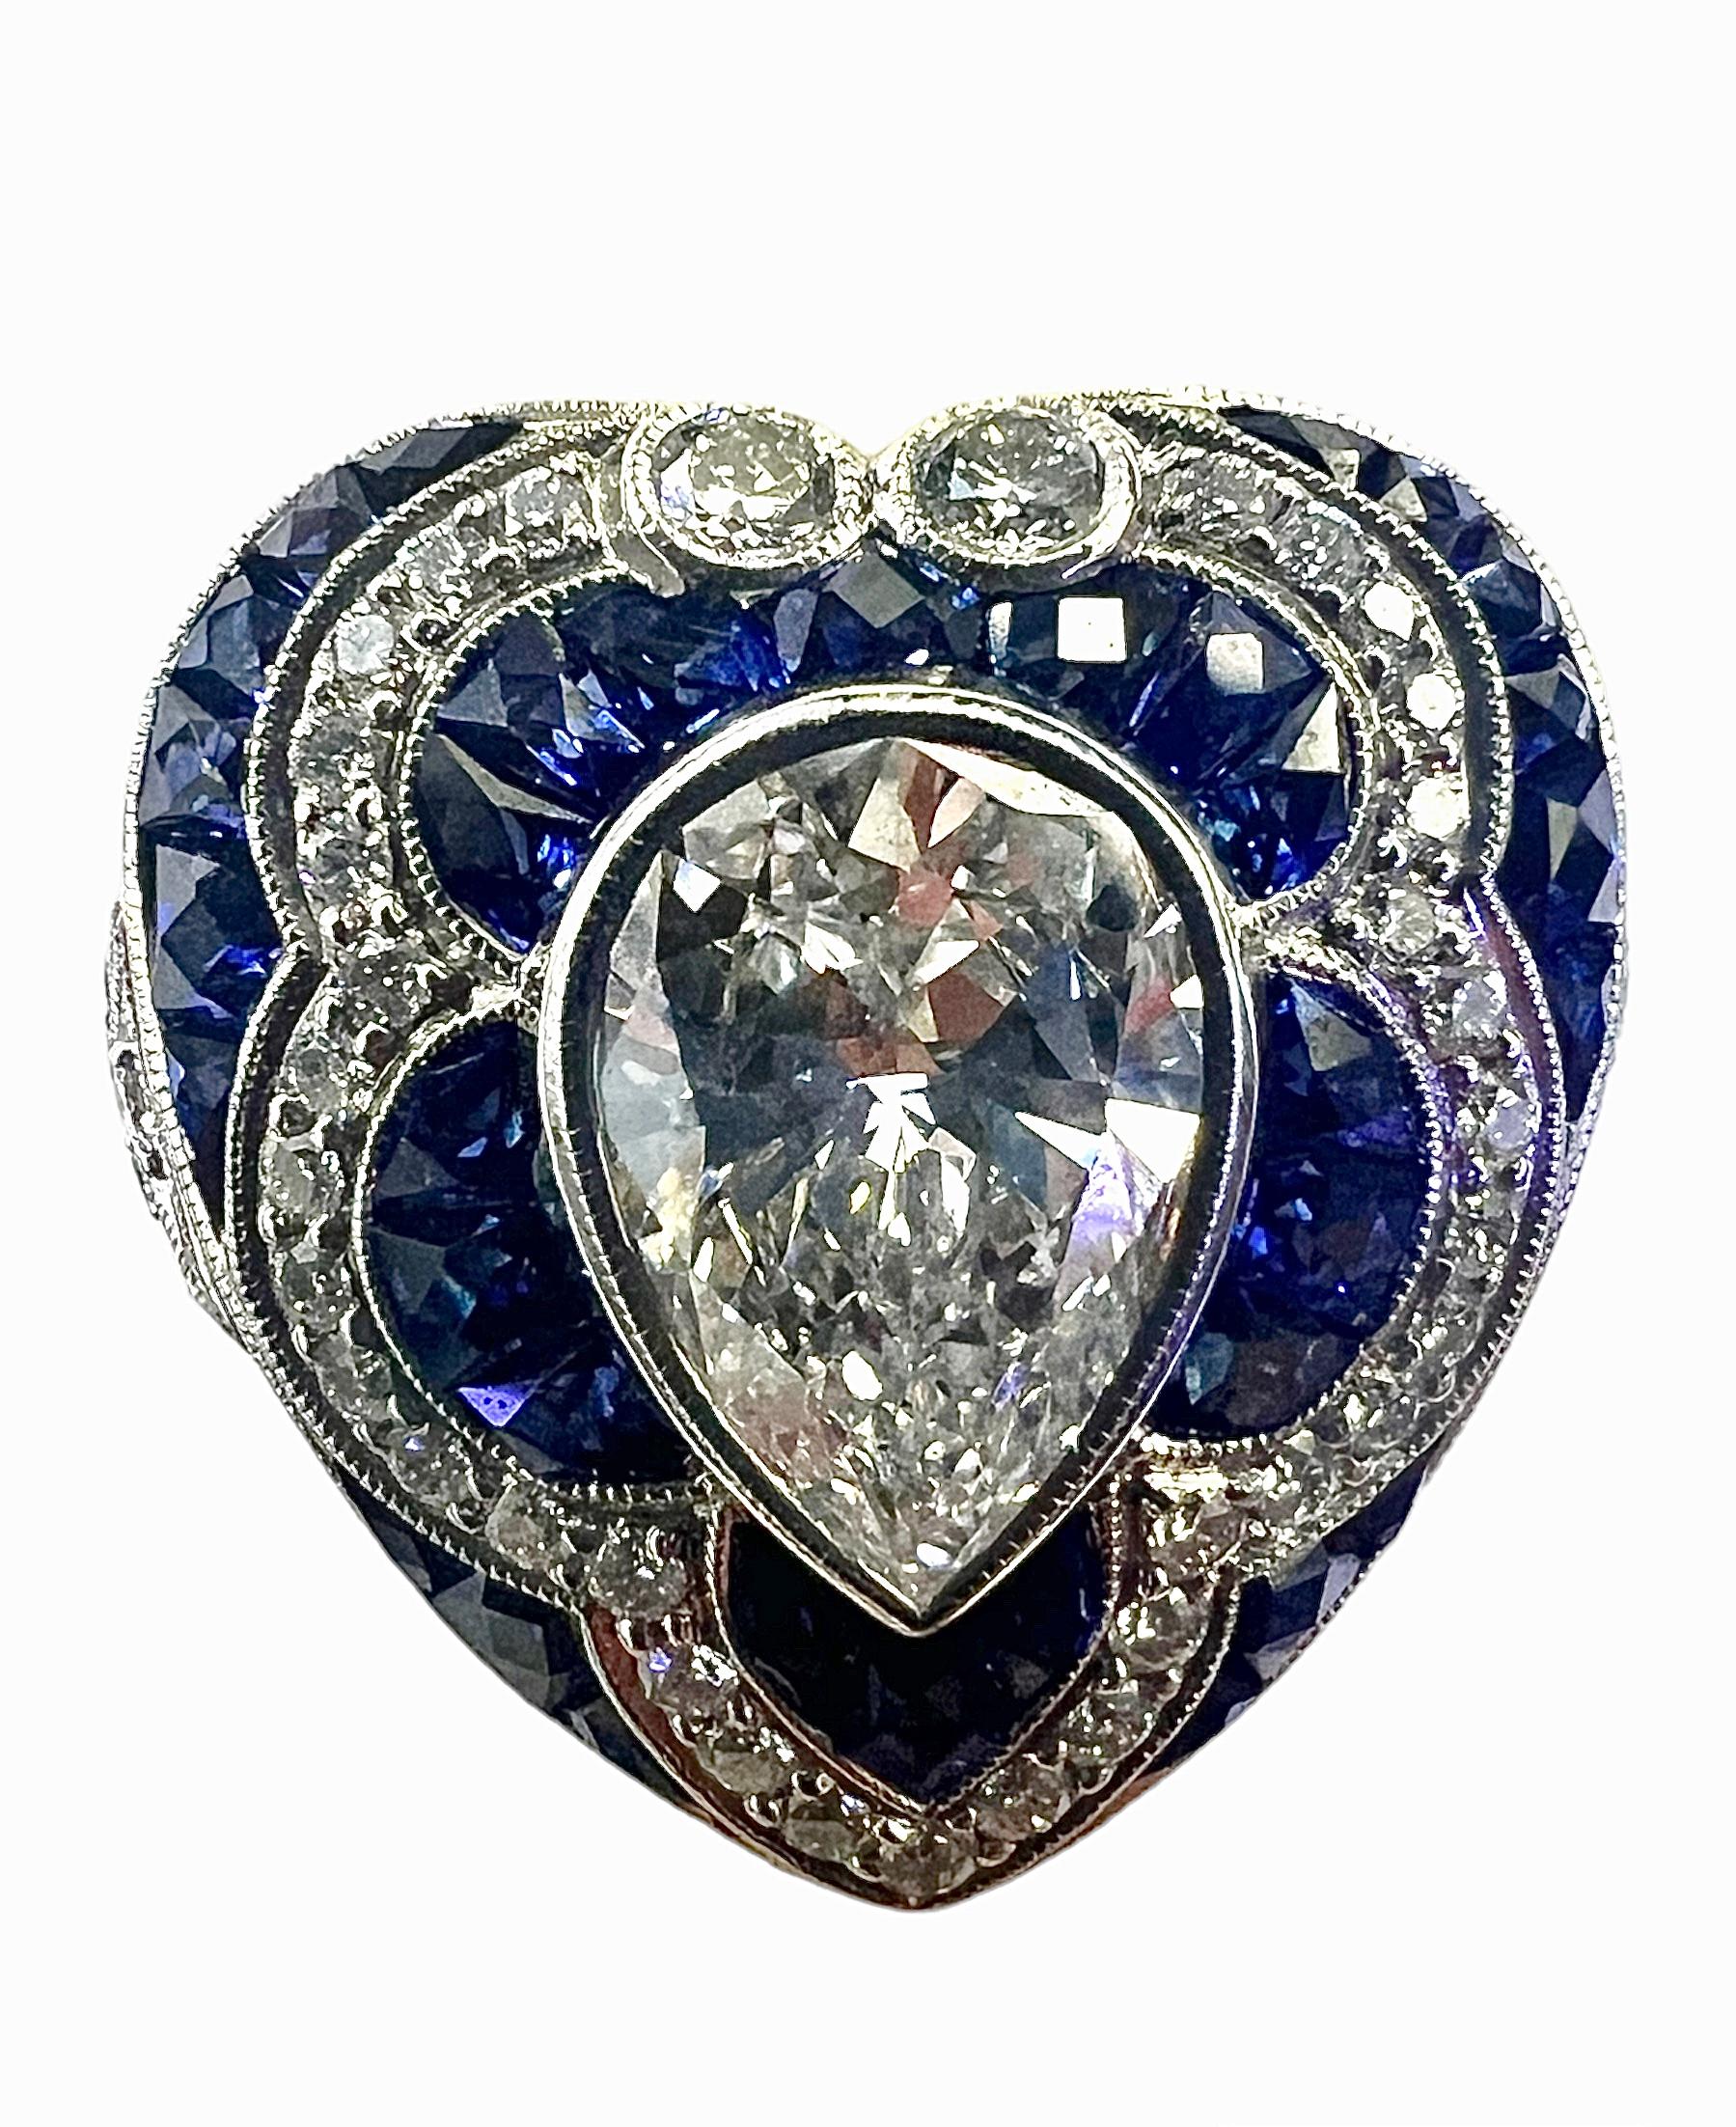 An art deco inspired platinum ring designed and handcrafted by Sophia D features a 1.20 carat pear shaped center diamond accented with 0.30 carats small diamonds and 1.20 carat blue sapphire.

Sophia D by Joseph Dardashti LTD has been known